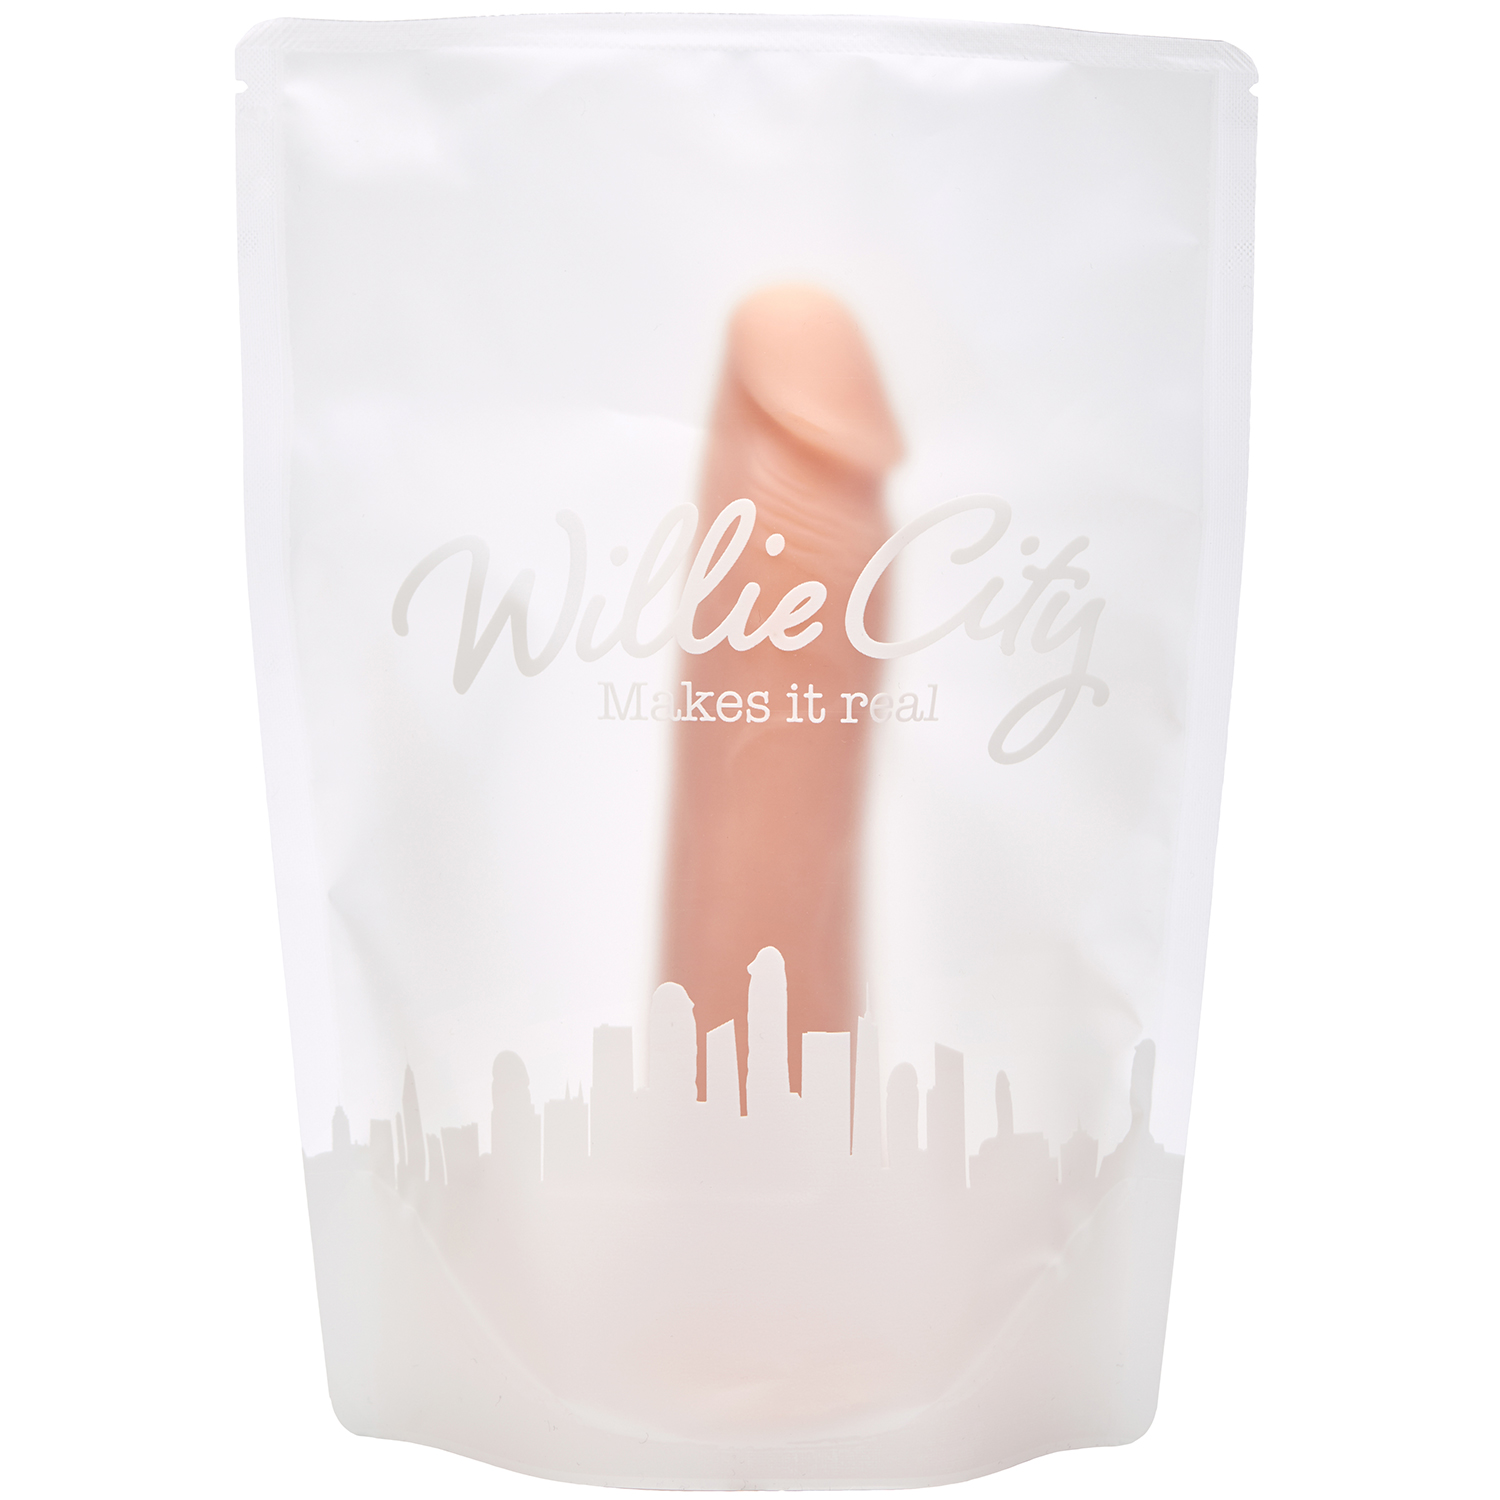 Willie City Luxe Realistisk Silikone Dildo med Sugekop 18 cm   - Nude thumbnail